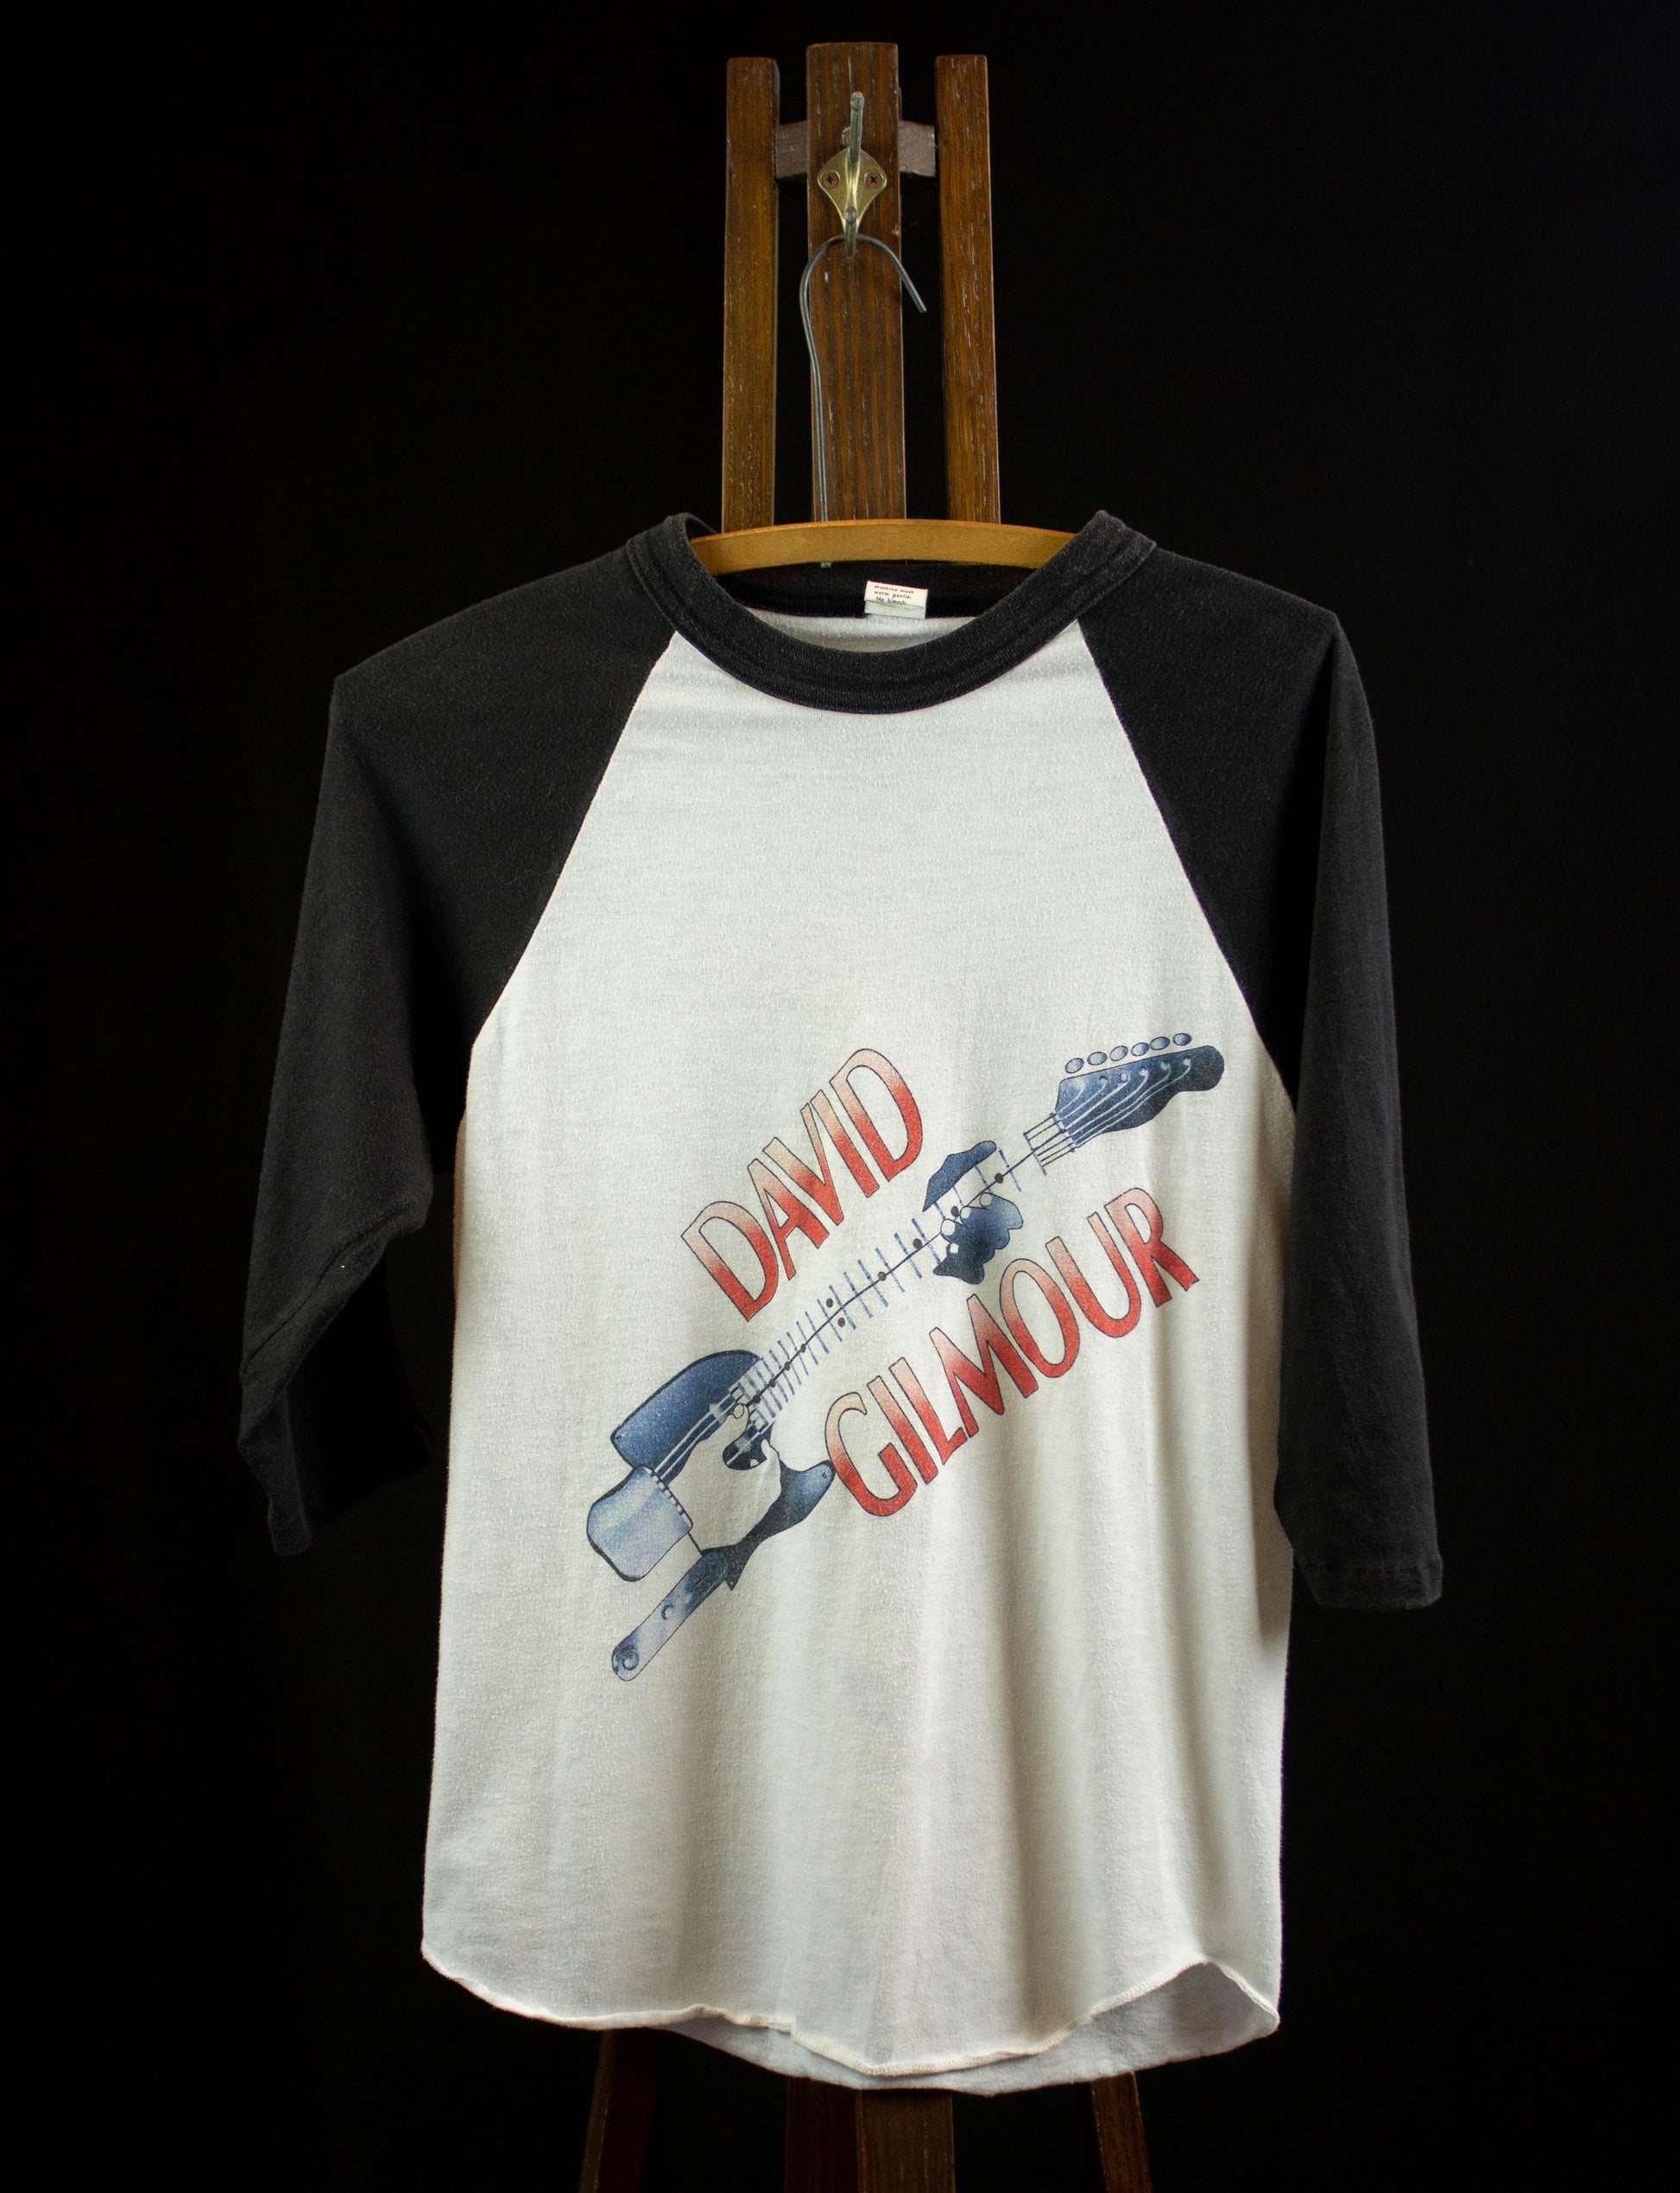 Vintage David Gilmour Concert T Shirt 1984 About Face Tour White and Black Raglan Jersey Small